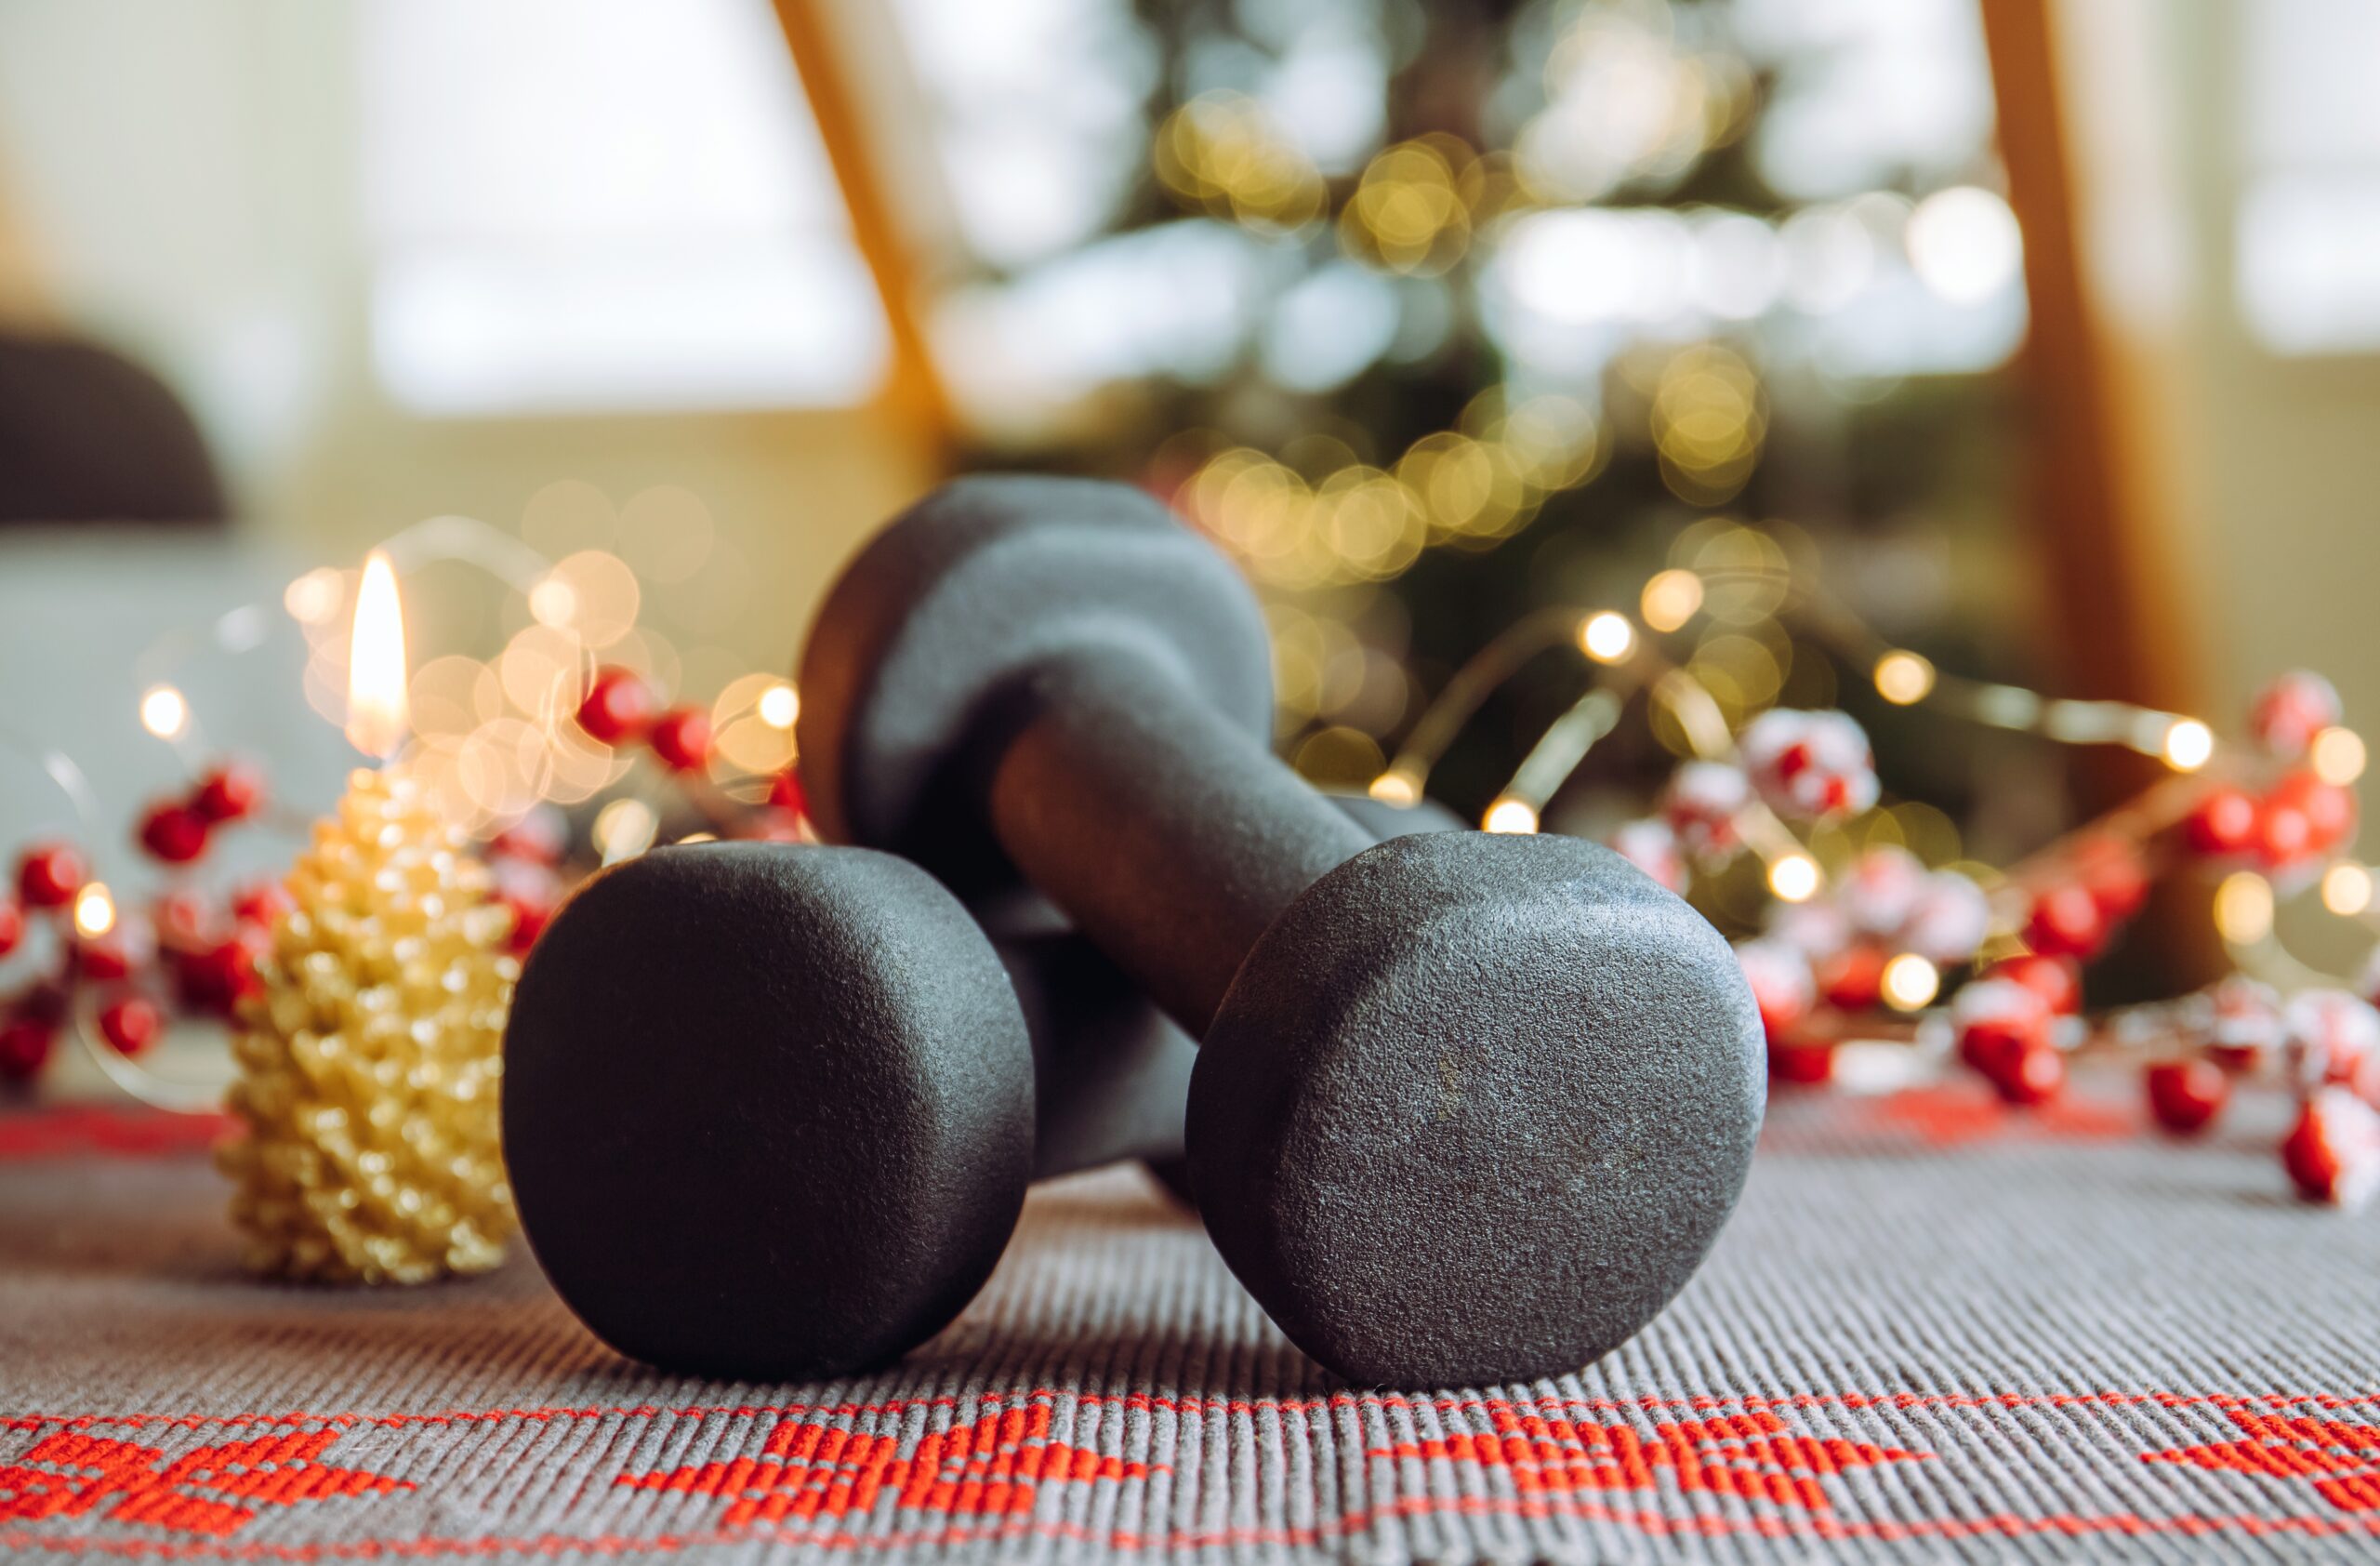 Festive Fitness: Home Workout Routines to Keep You Active During the Holiday Season